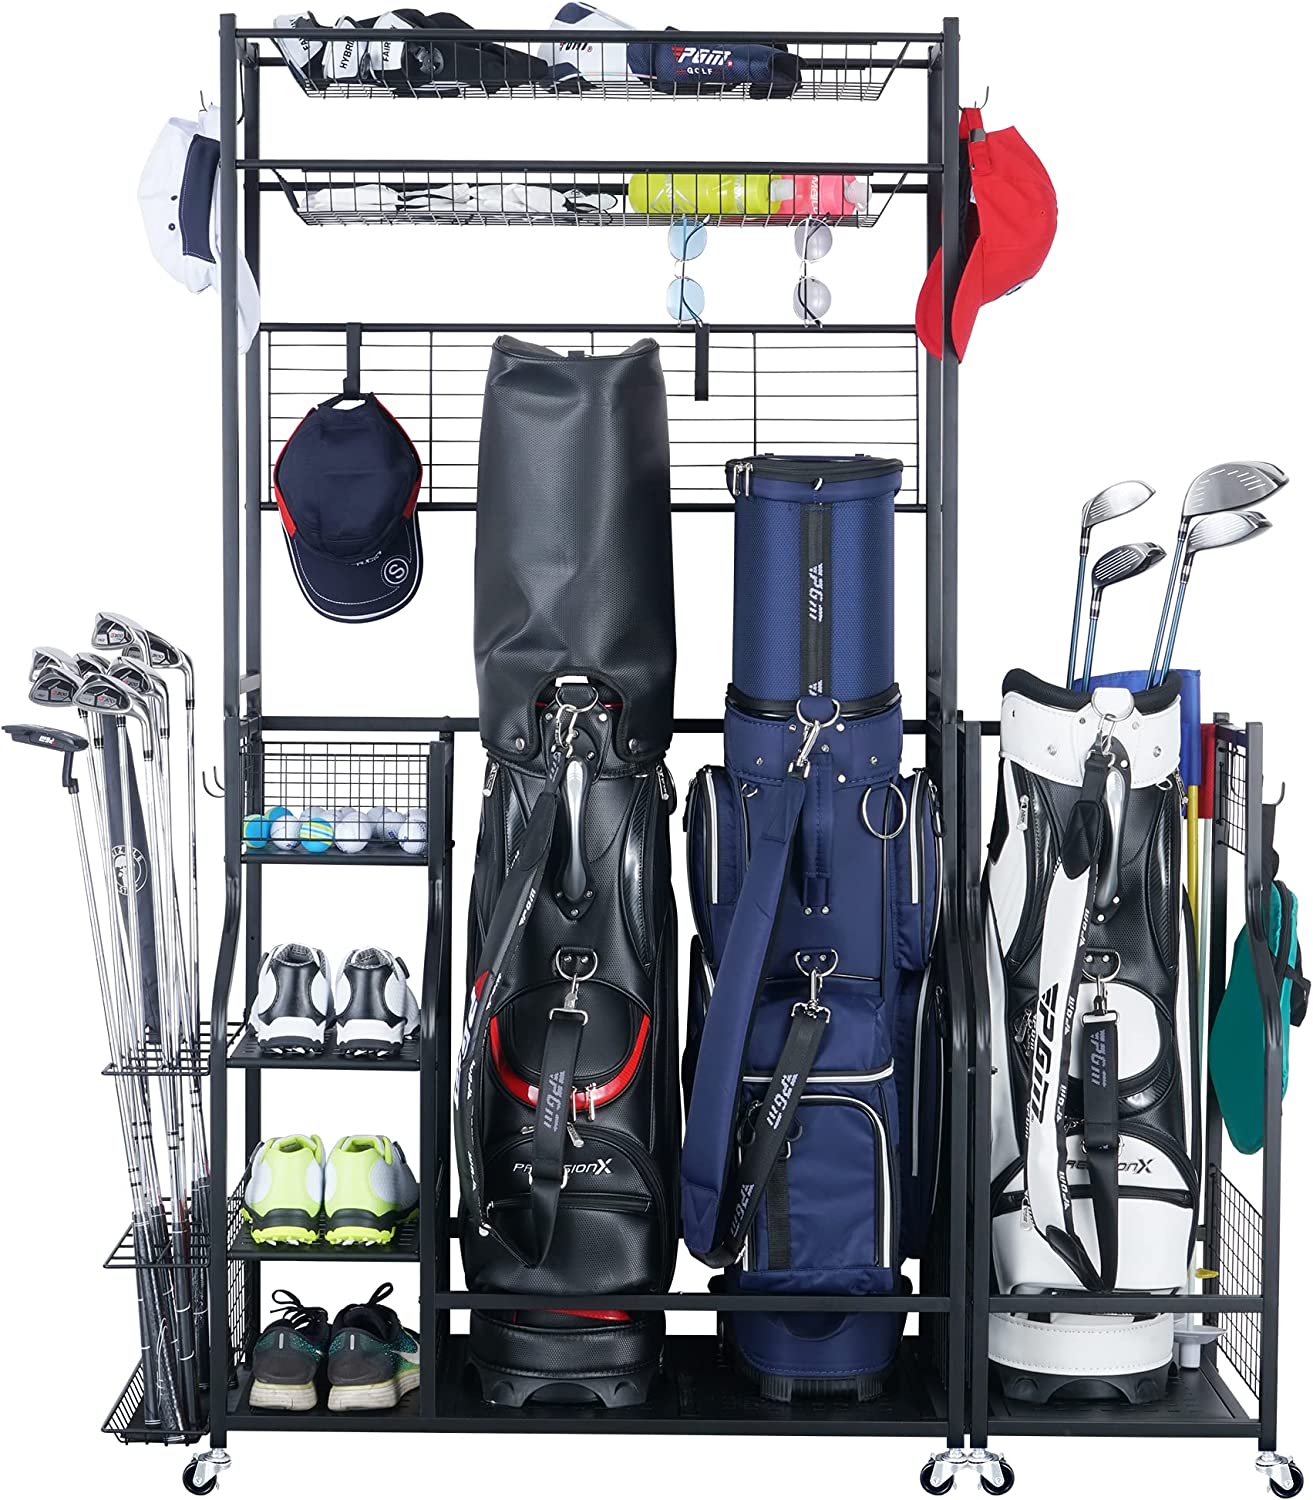 Milliard Golf Organizer - Extra Large Size - Fit 2 Golf Bags and